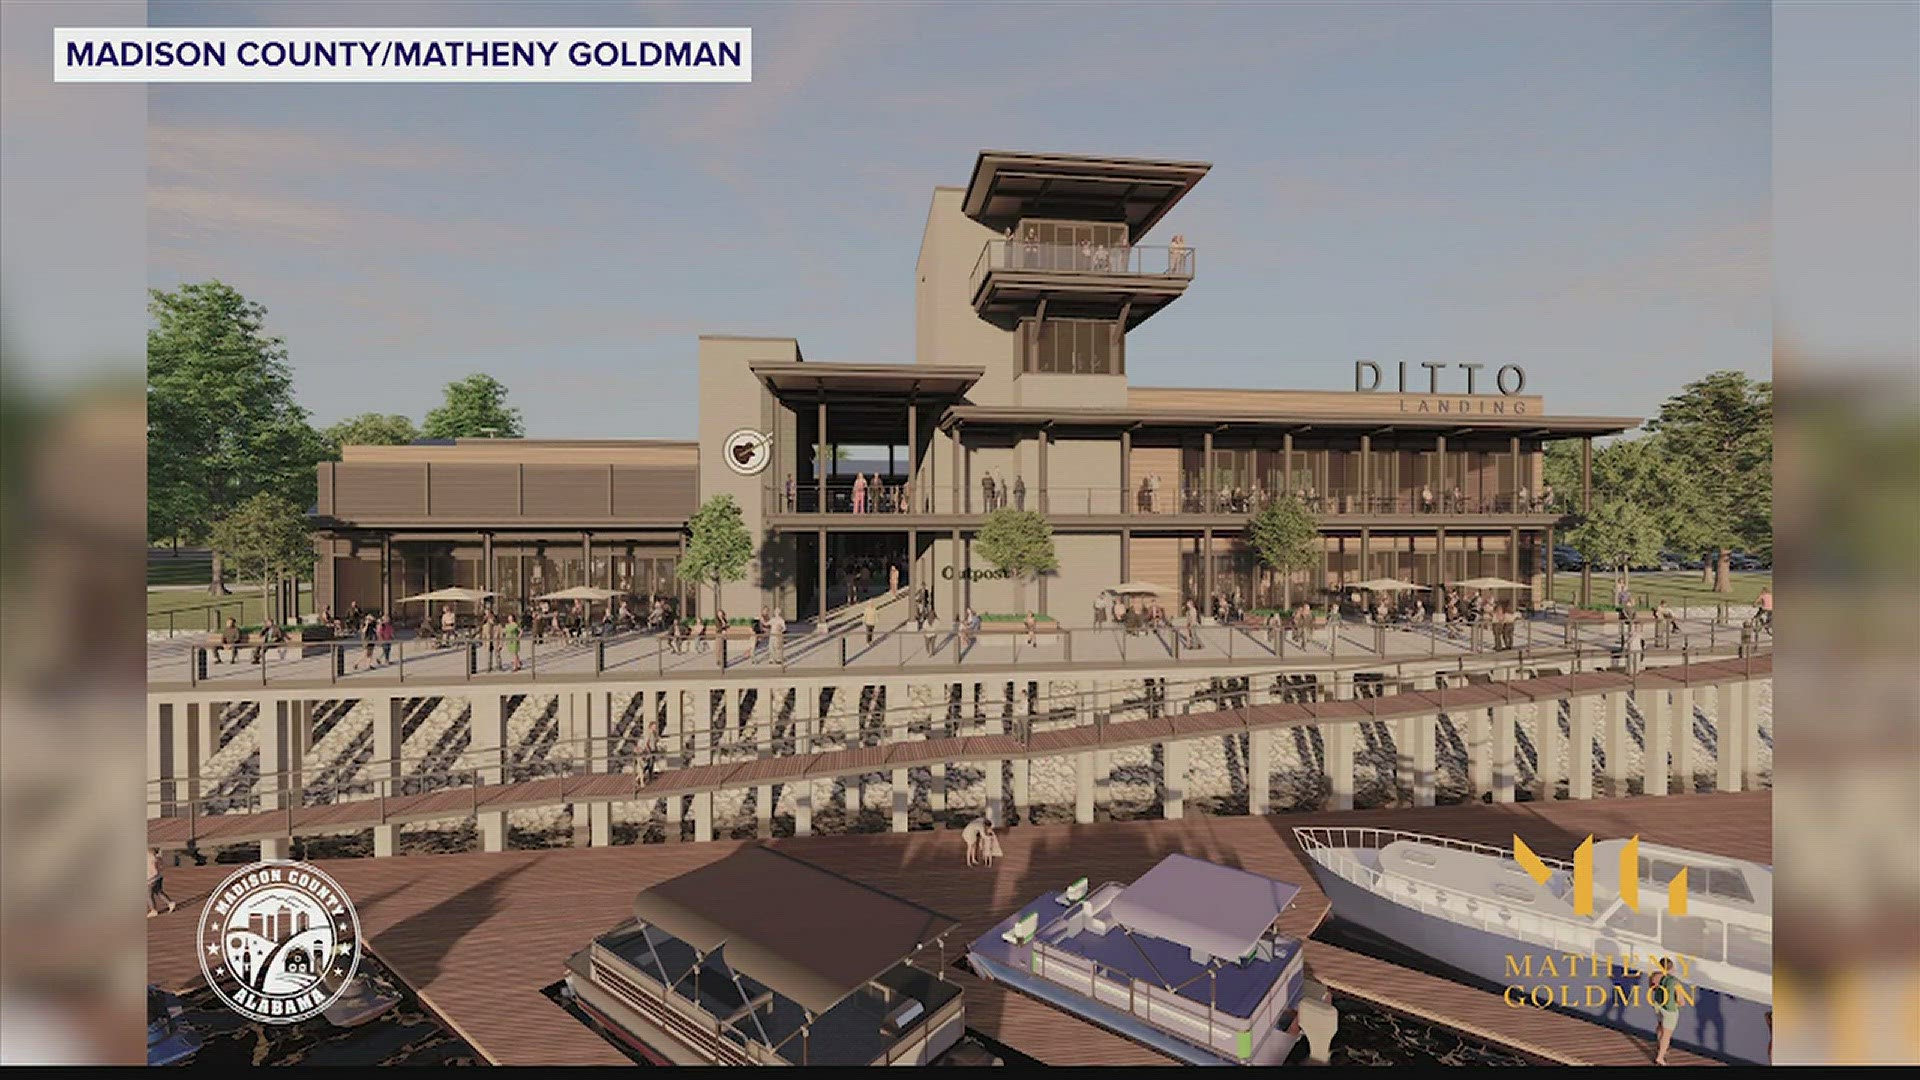 The project, expected to be completed in 2025, will convert the State Docks Building into a new entertainment venue and mixed-use facility.